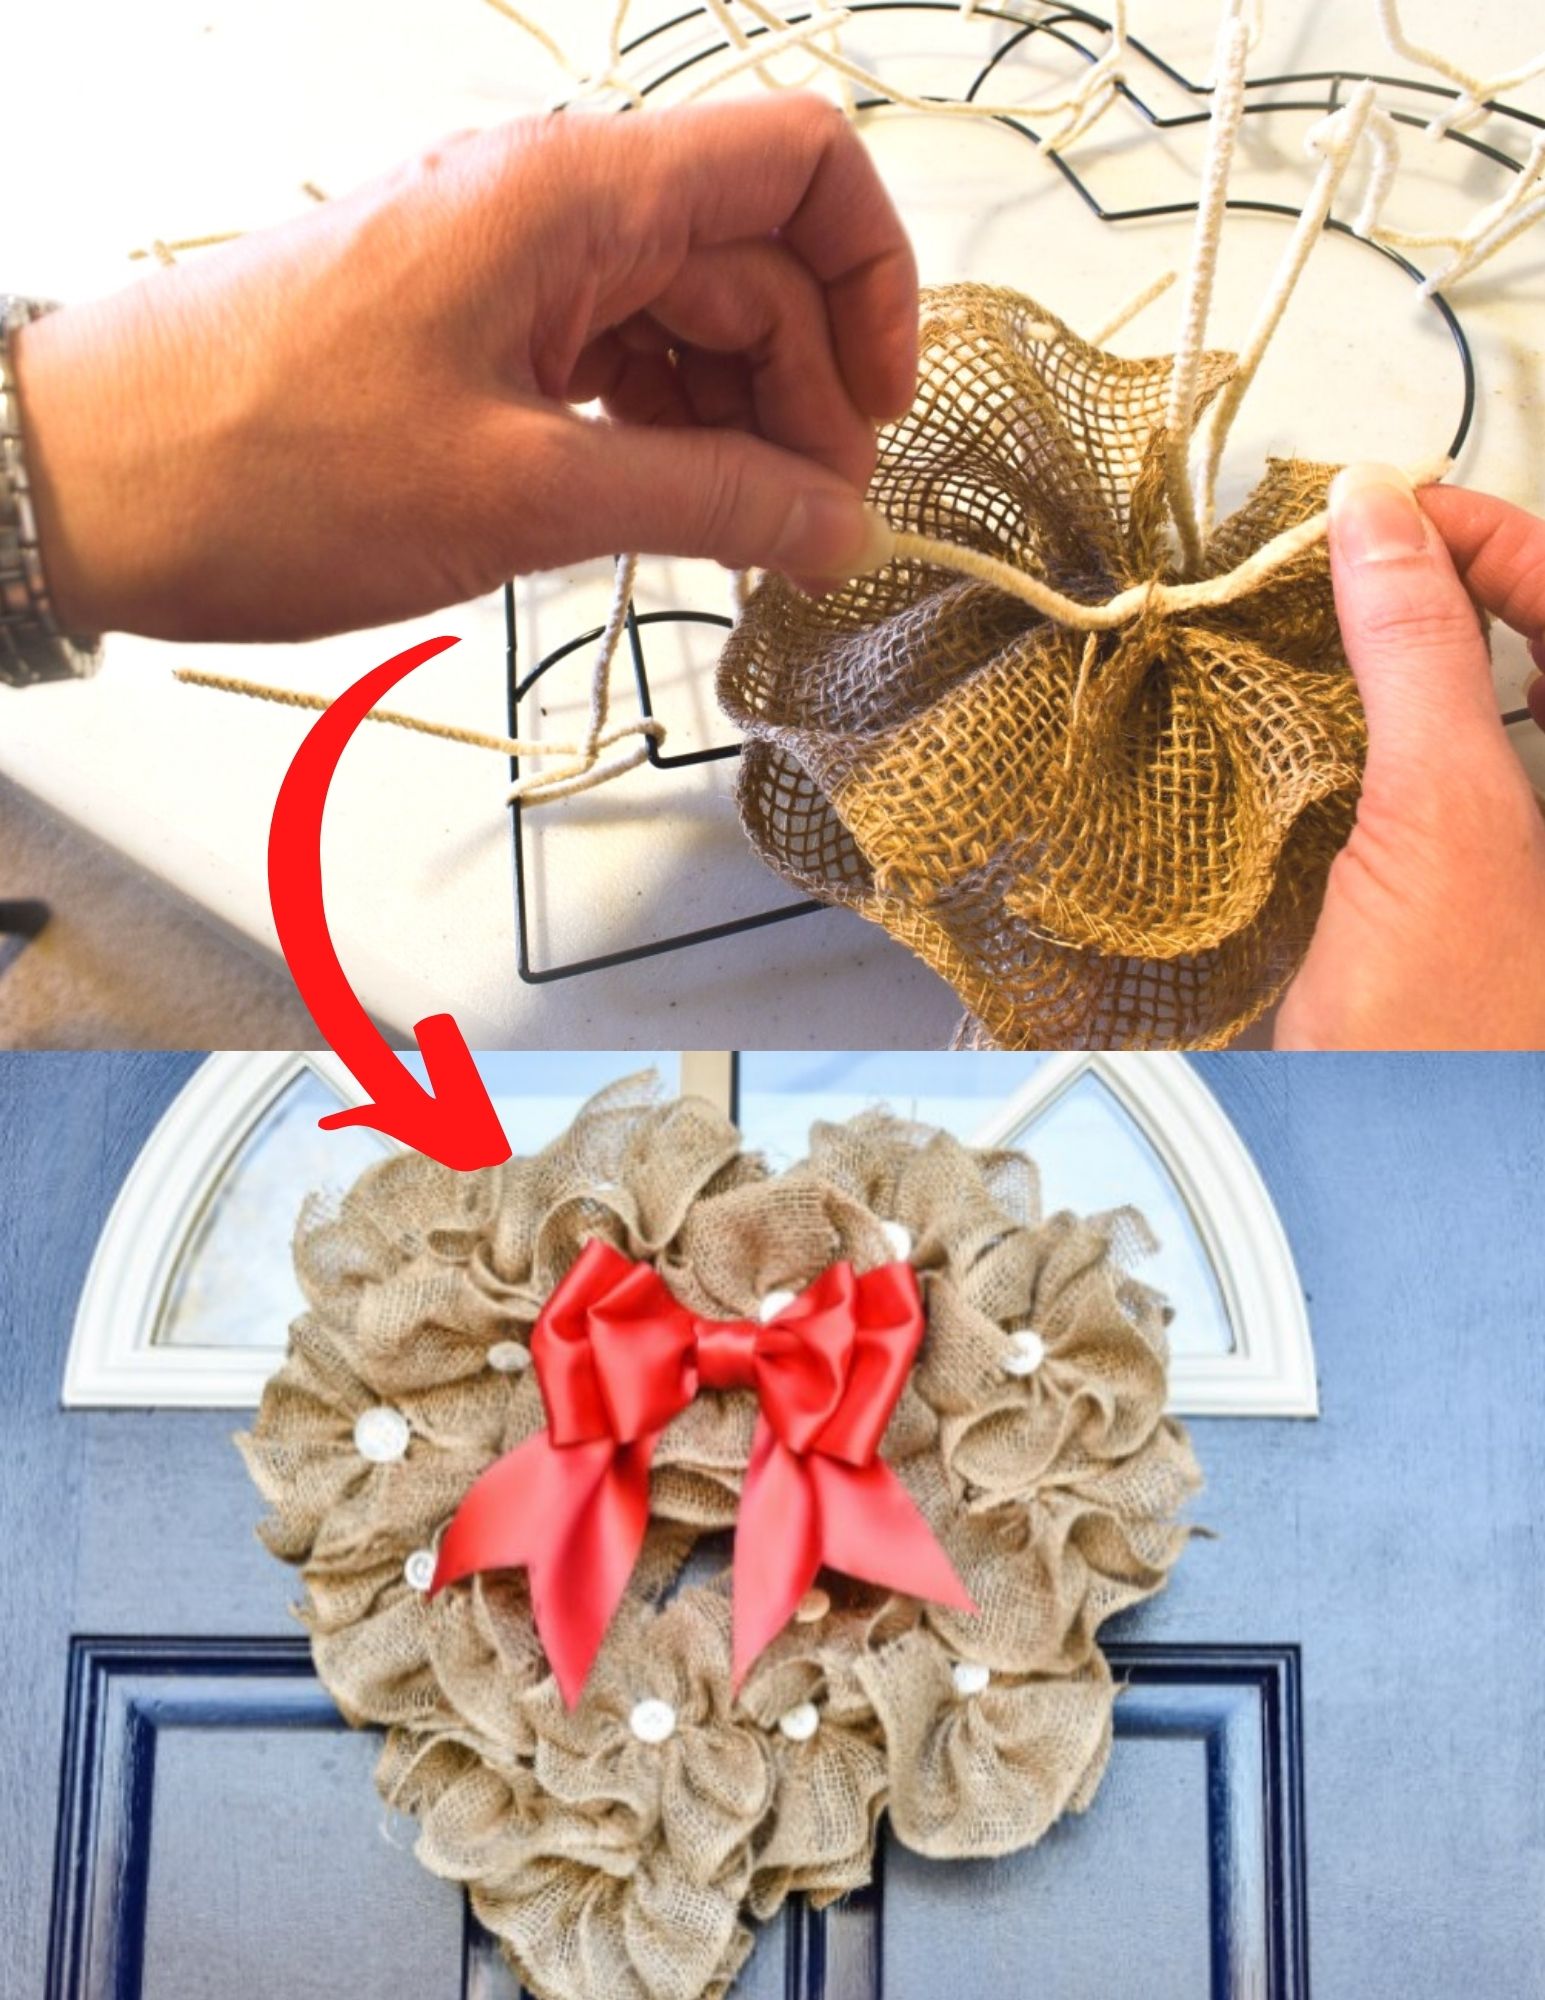 DIY Burlap Wreath for Valentine's Day with Bow Tutorial - Zucchini Sisters